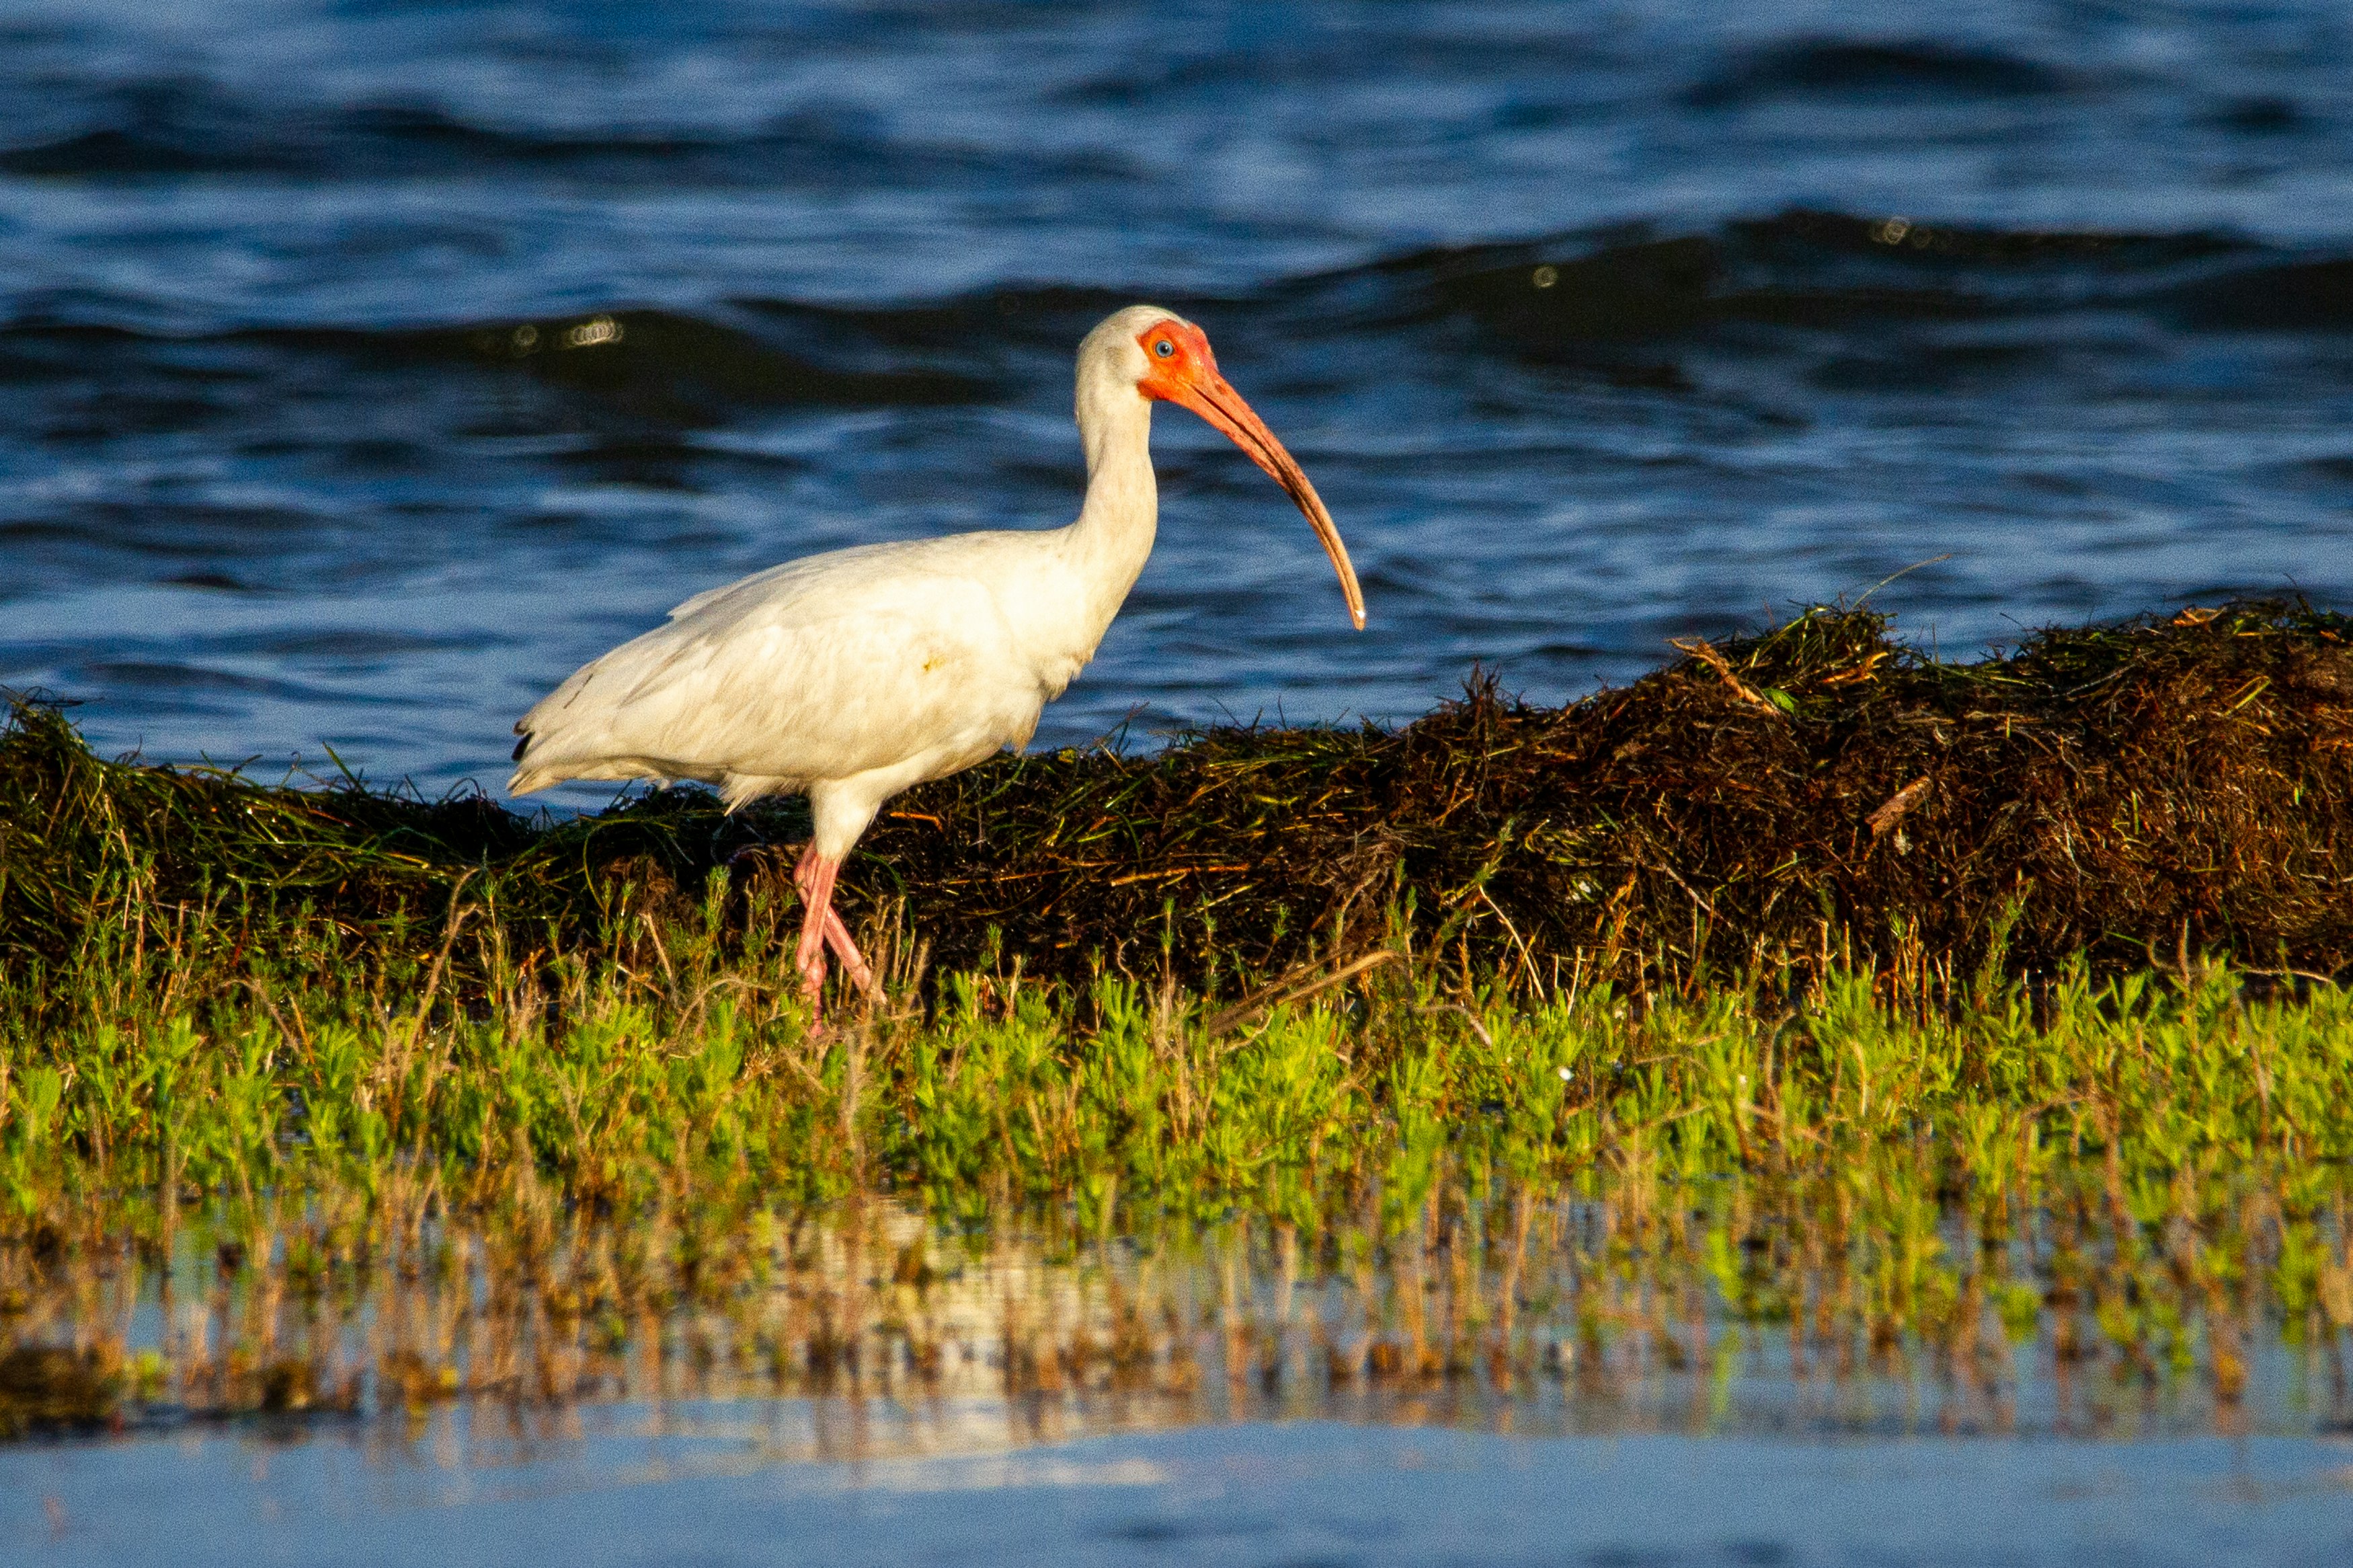 A white ibis forages for food in the shallow water.